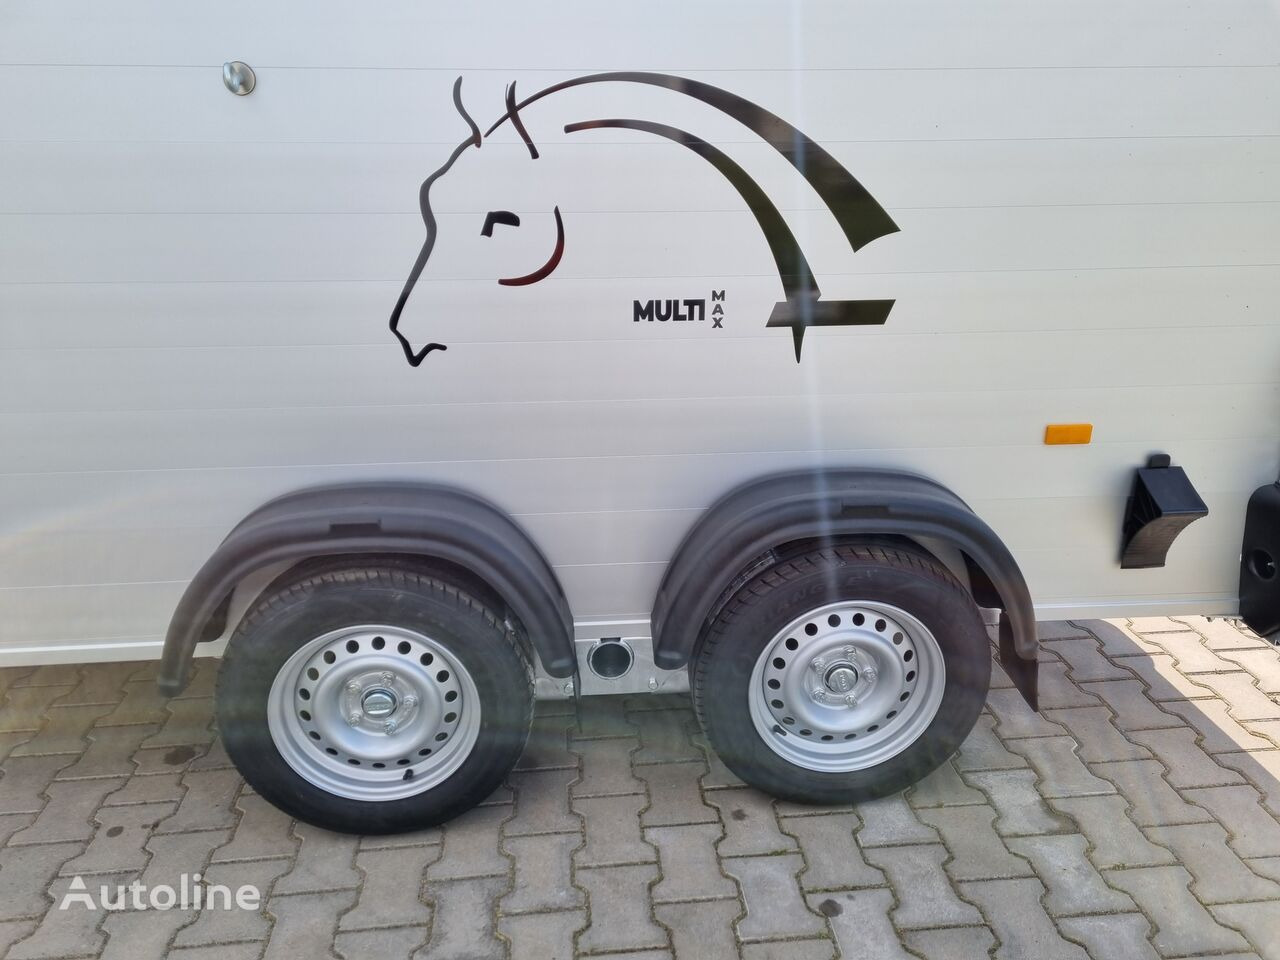 New Horse trailer Cheval Liberté Multimax trailer for 2 horses GVW 2600kg big tack room saddle: picture 7